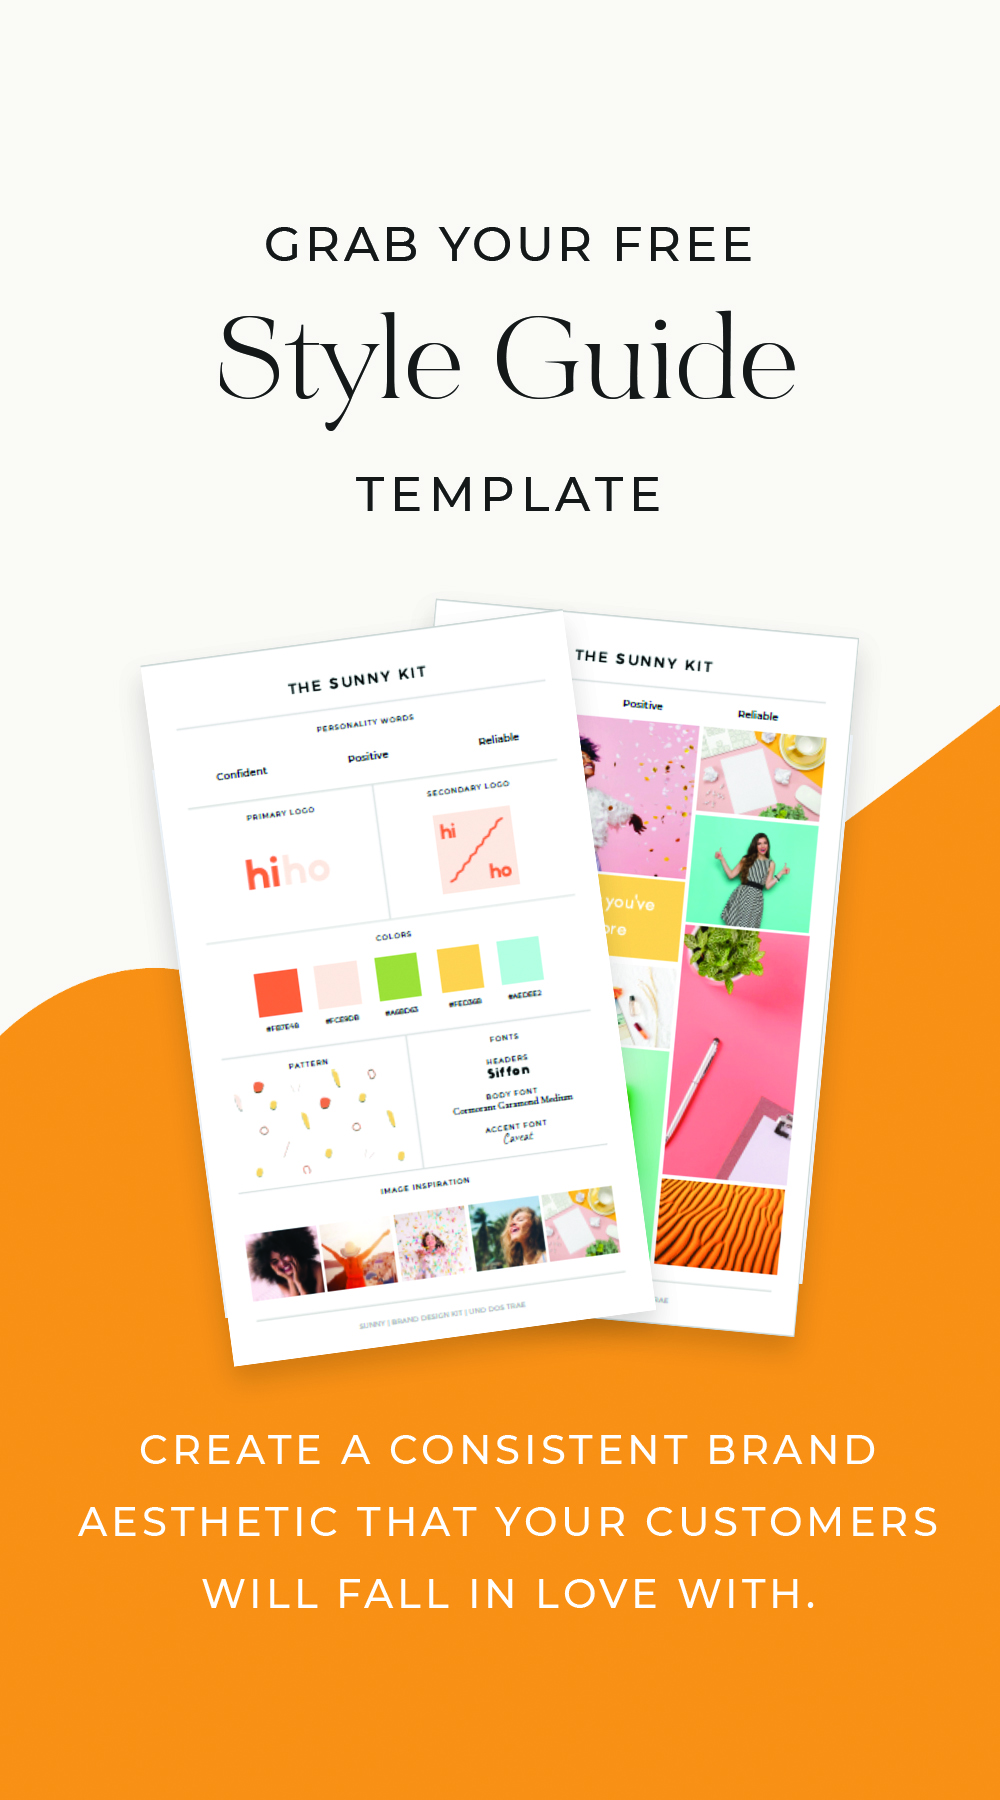 Access The Style Guide Template from Uno Dos Trae